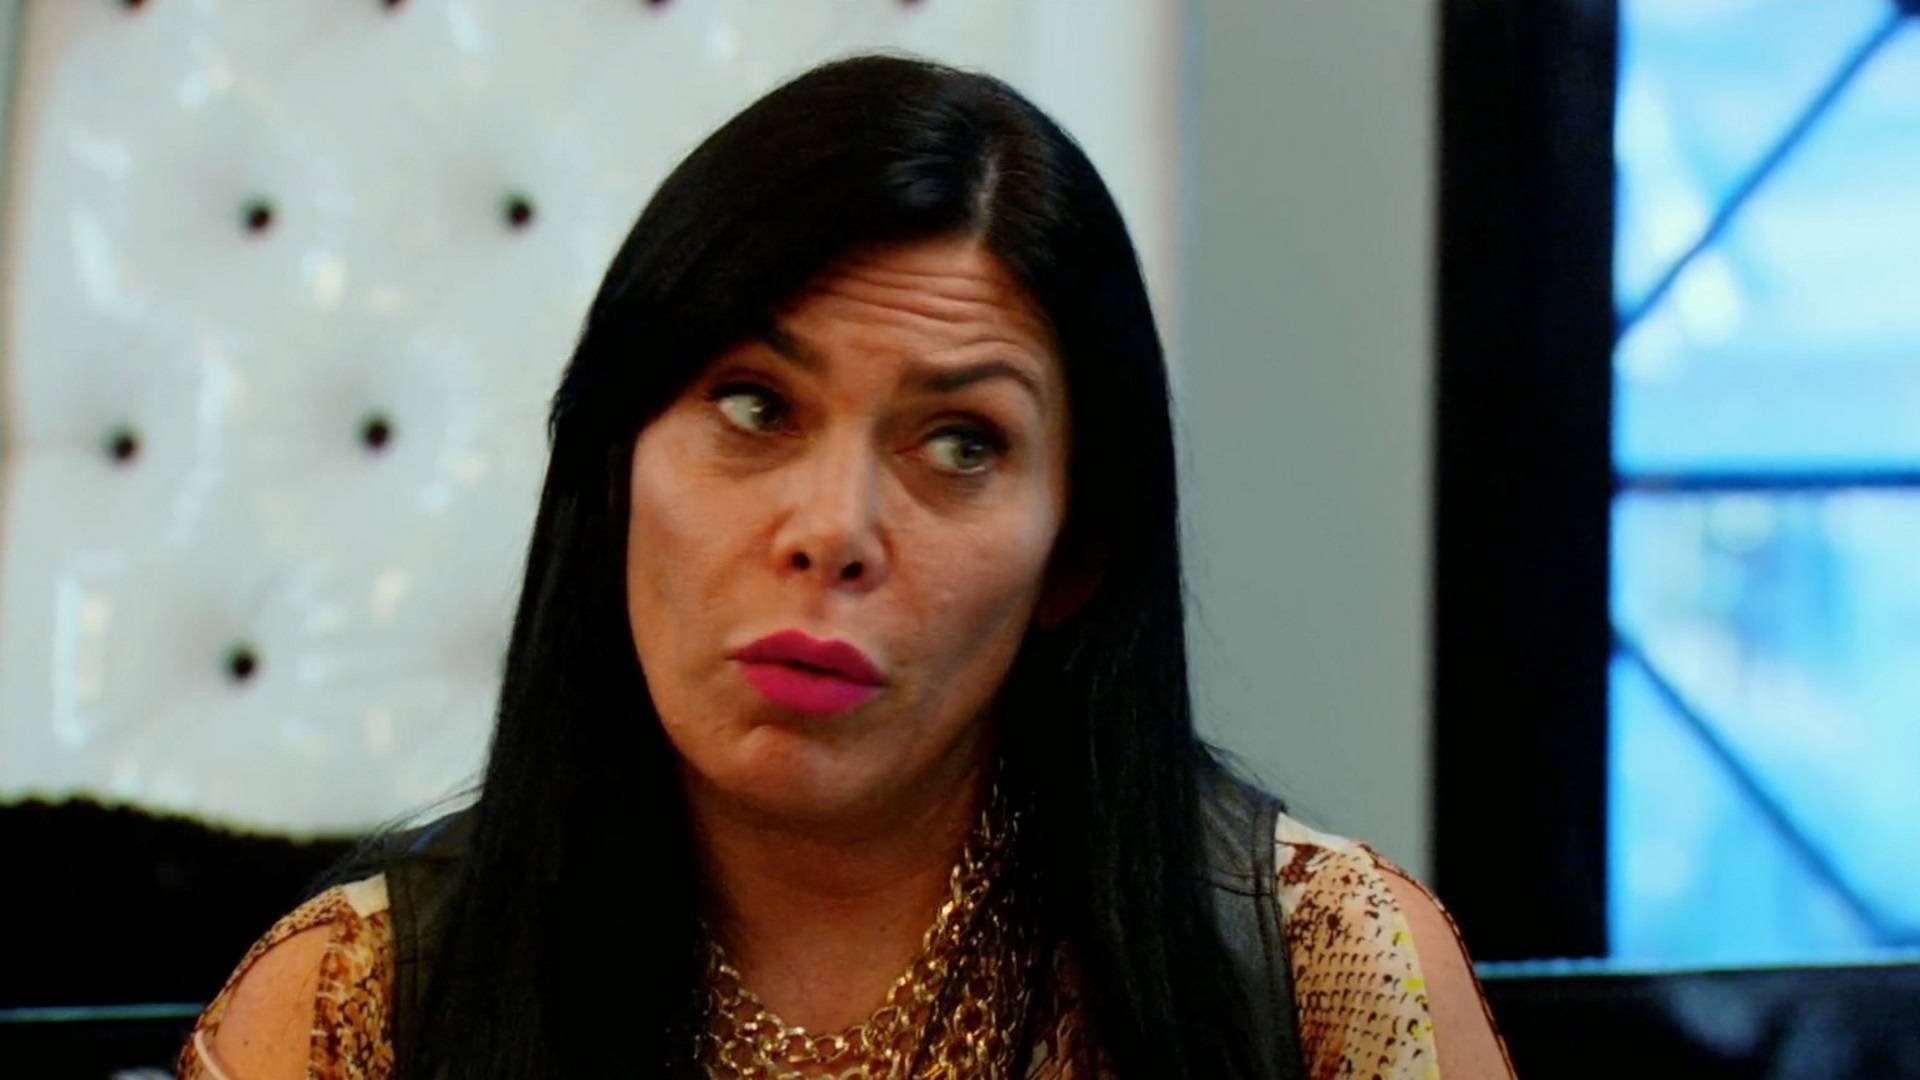 Mob Wives - Season 5, Ep. 12 - The Final Face-off - Full Episode | VH1